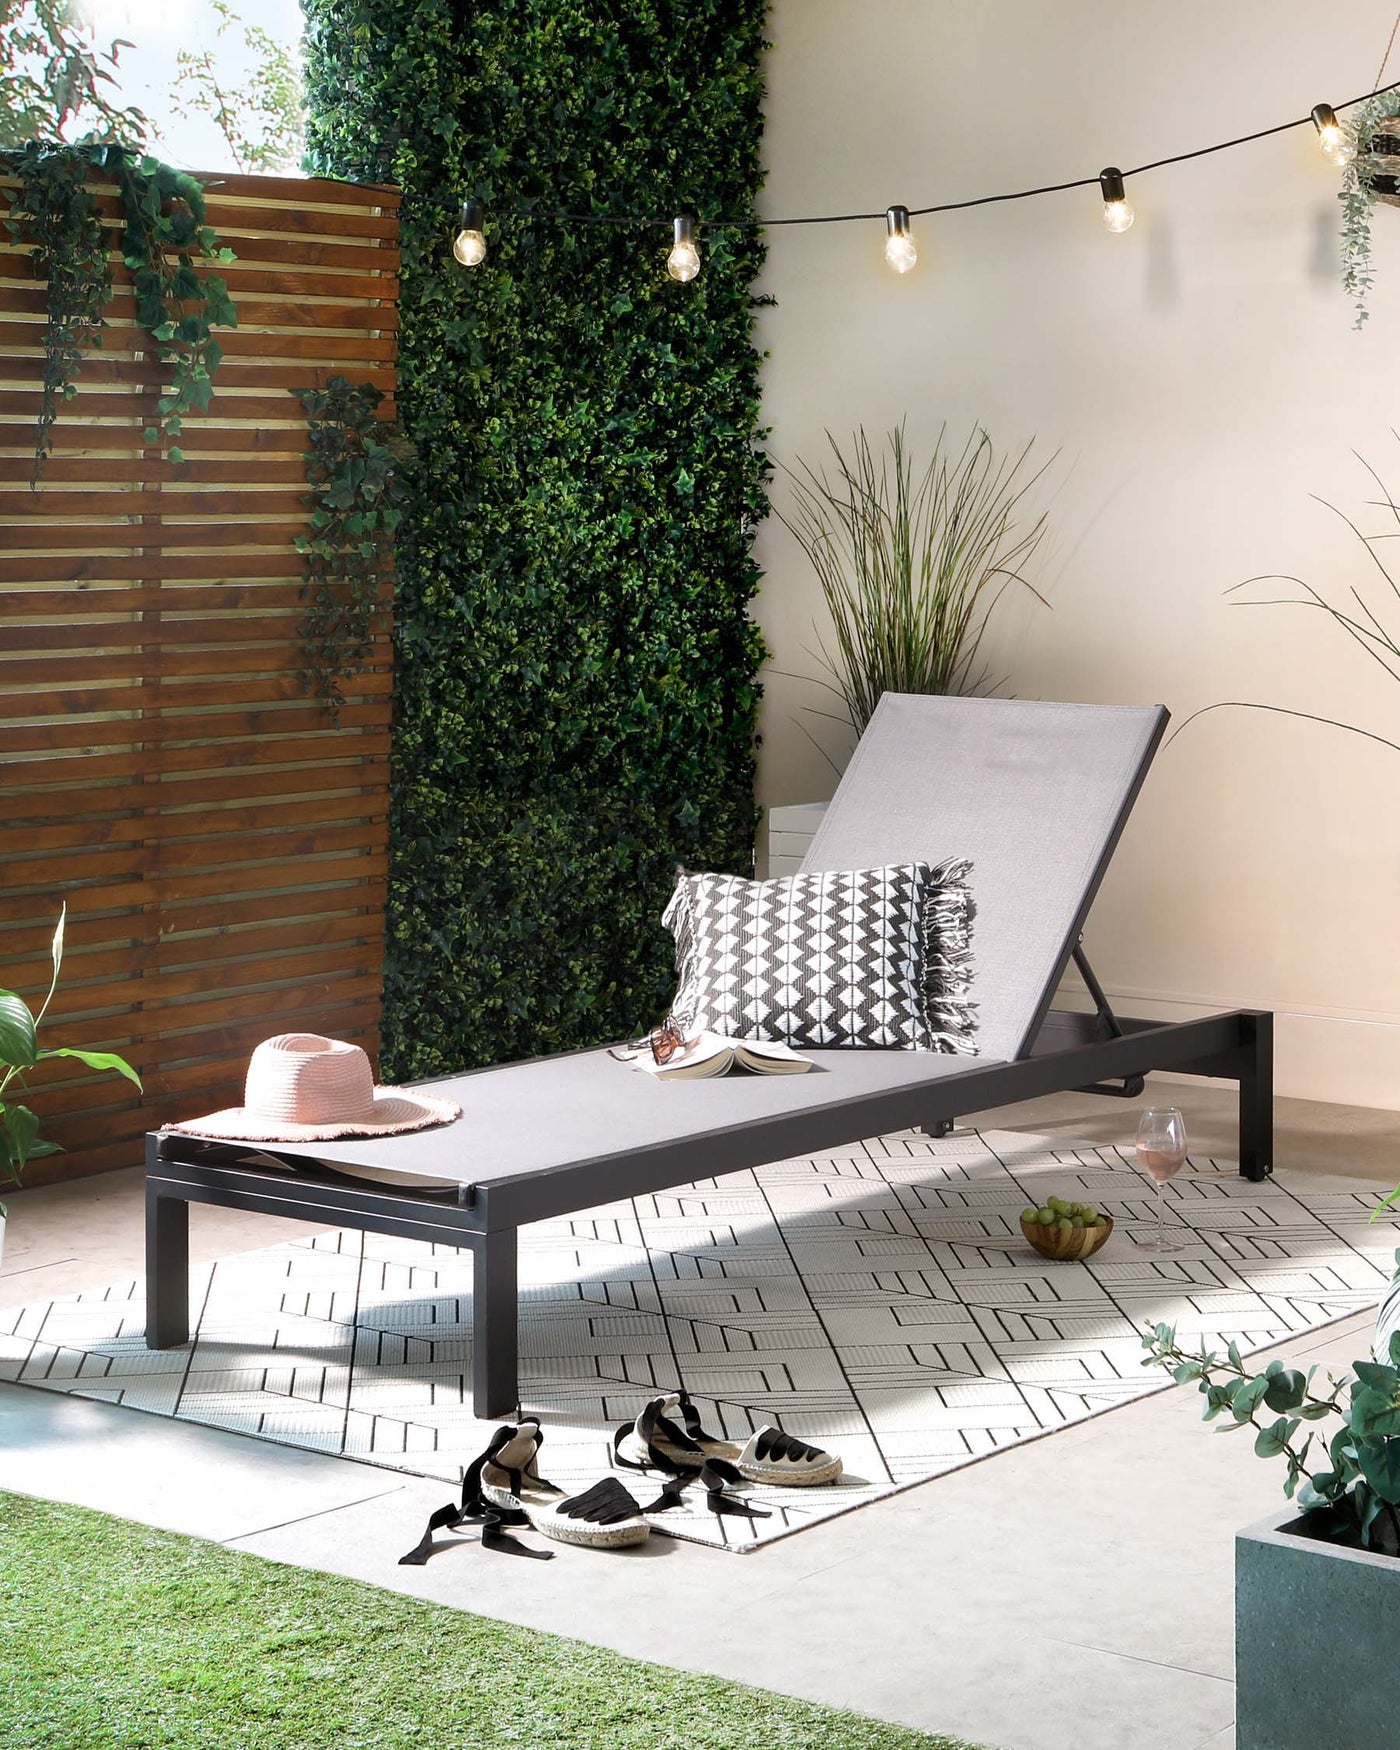 Modern outdoor chaise lounge in dark grey with an adjustable backrest and a textured grey cushion, accented with a black and white geometric patterned throw pillow and a fringed blanket.